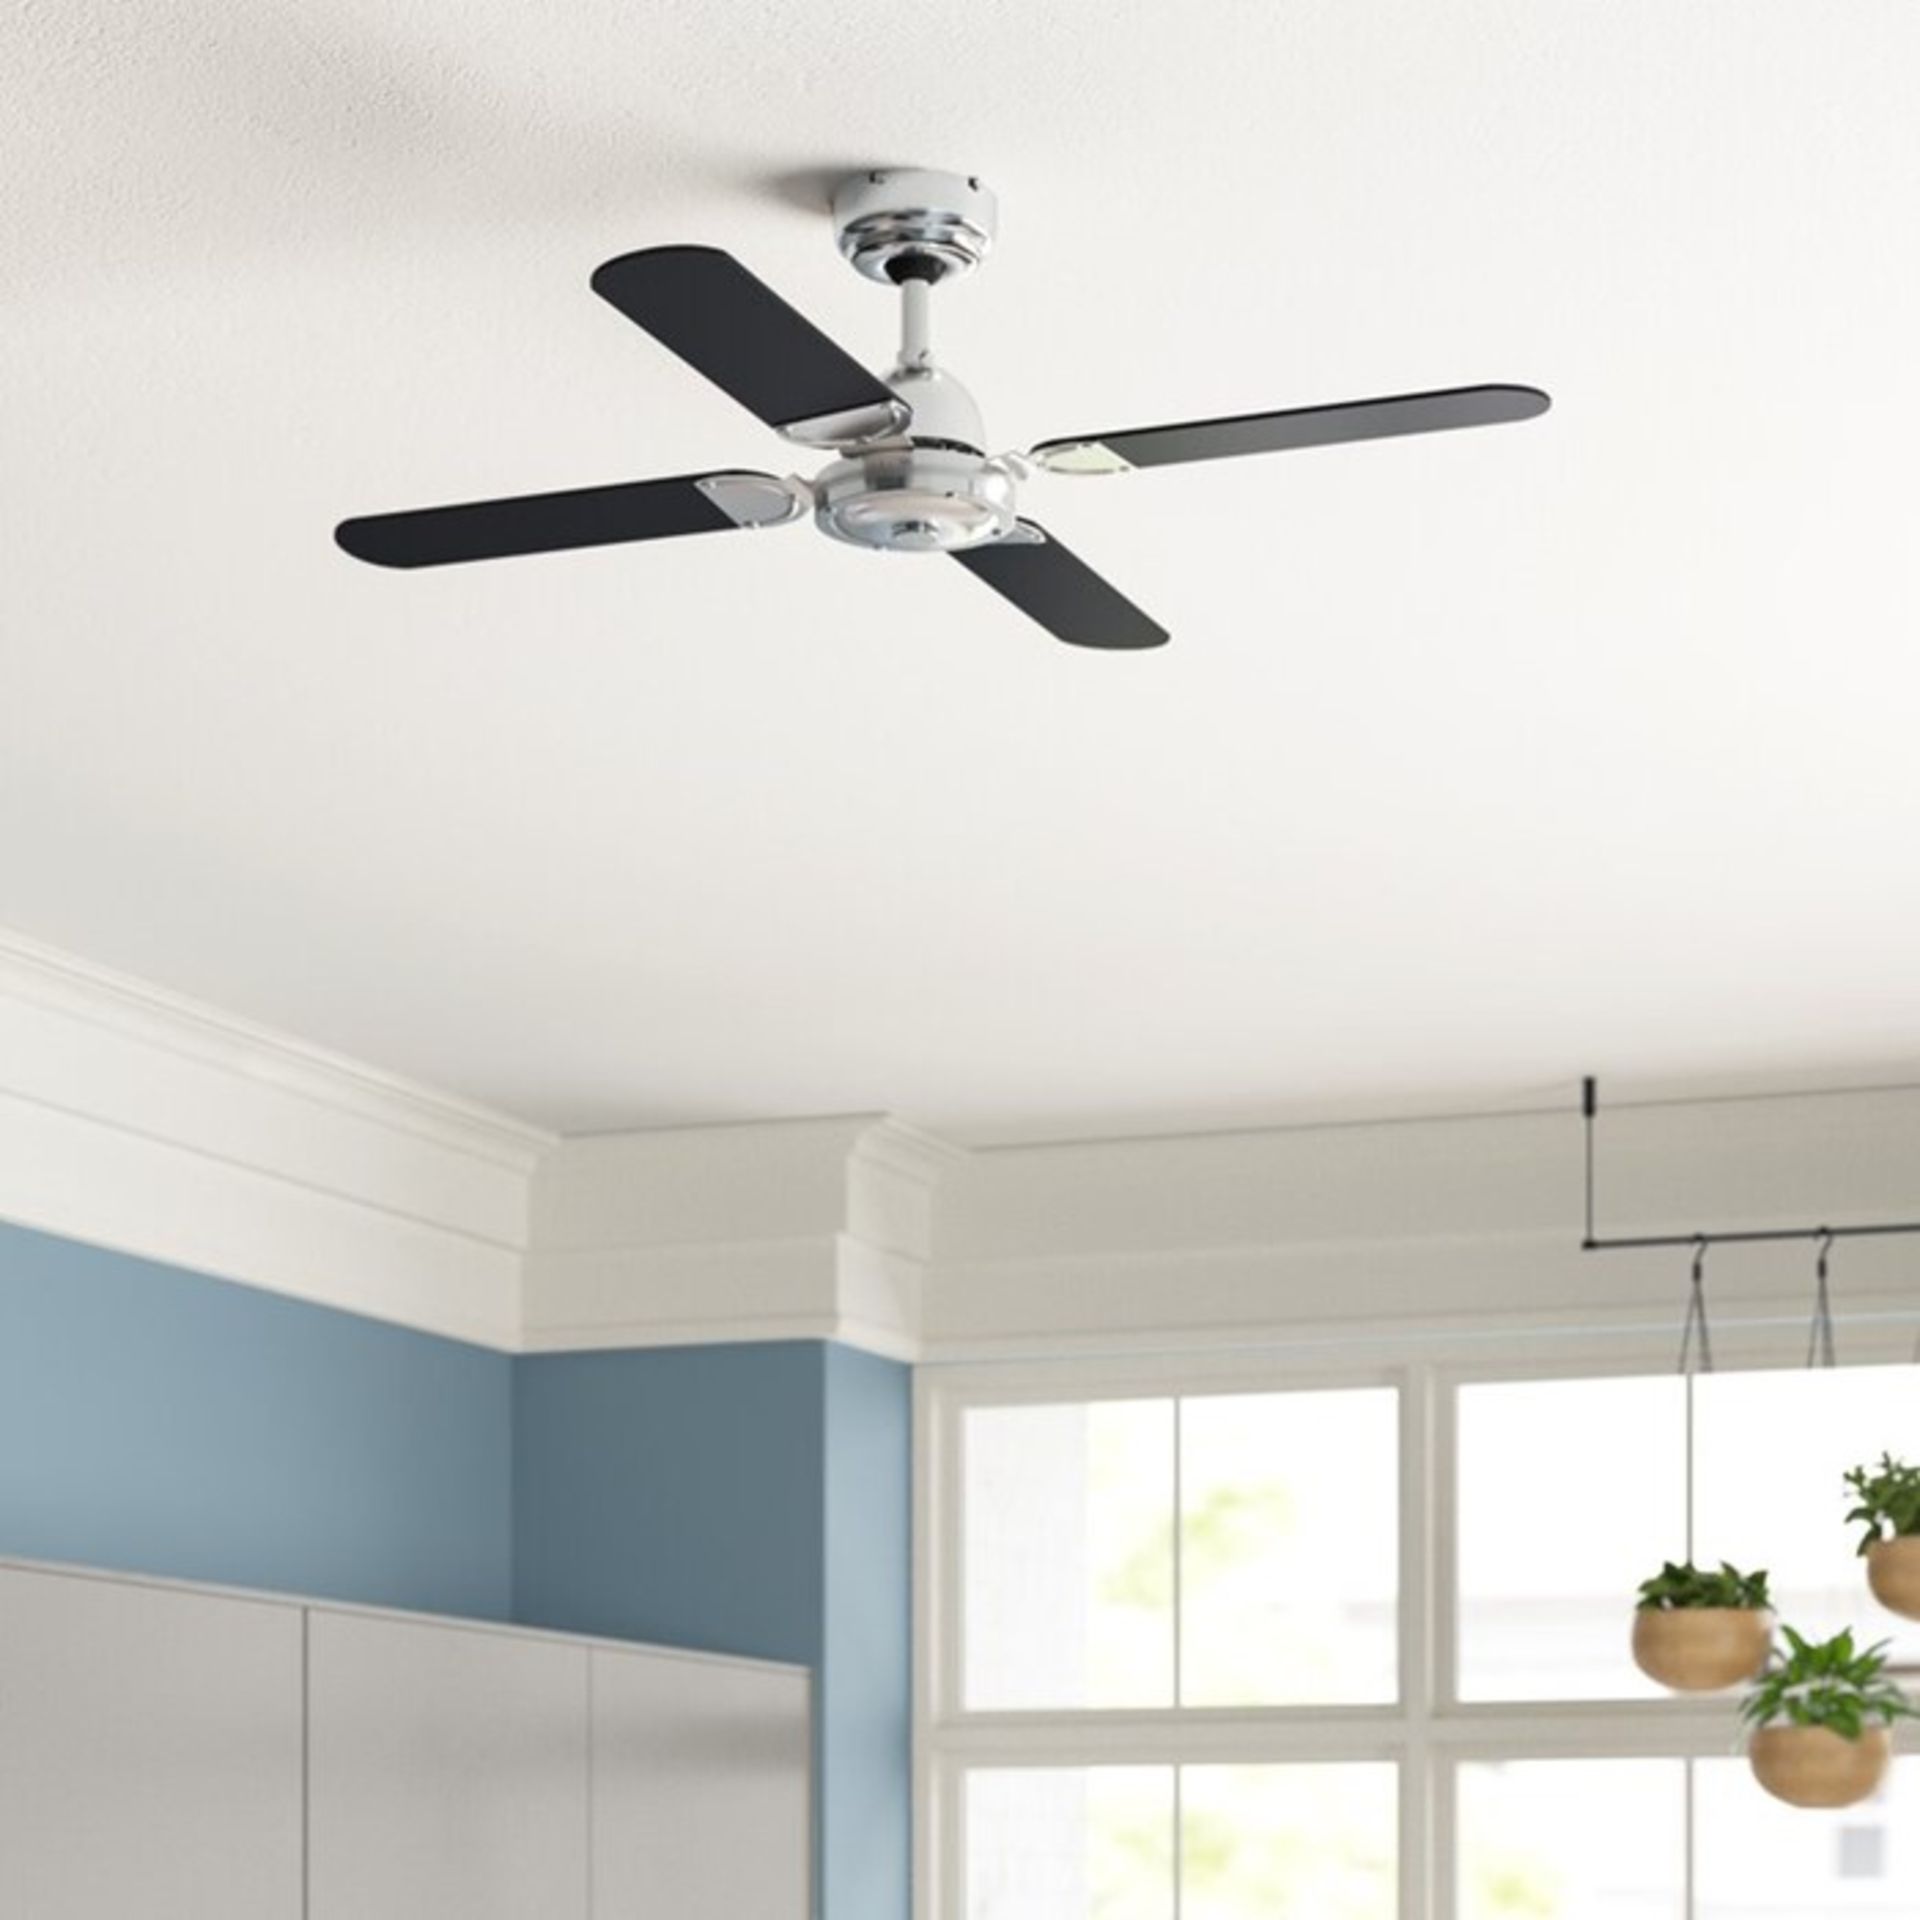 17 Stories, Gonsalve 107cm Magnum 4-Blade Ceiling Fan with Remote - RRP £59.99 (MSUN1880 - 17210/71)